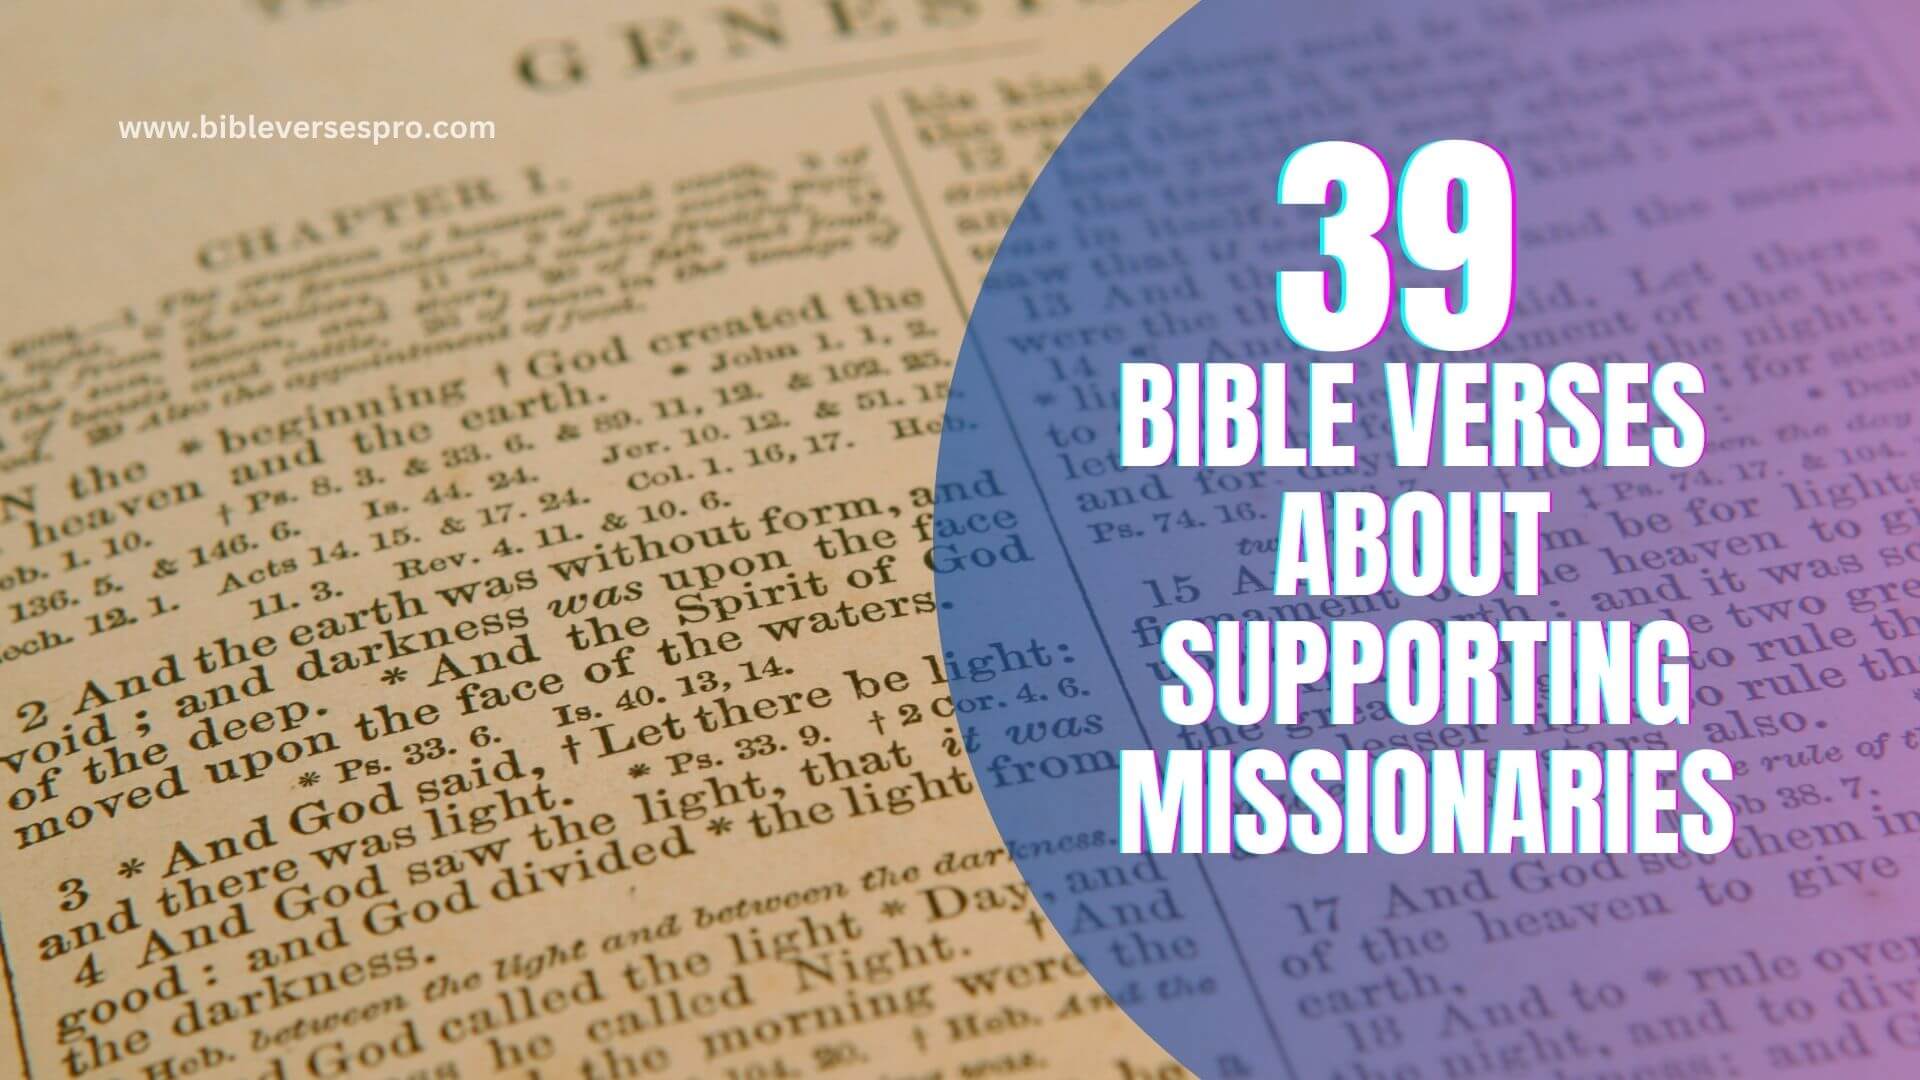 BIBLE VERSES ABOUT SUPPORTING MISSIONARIES